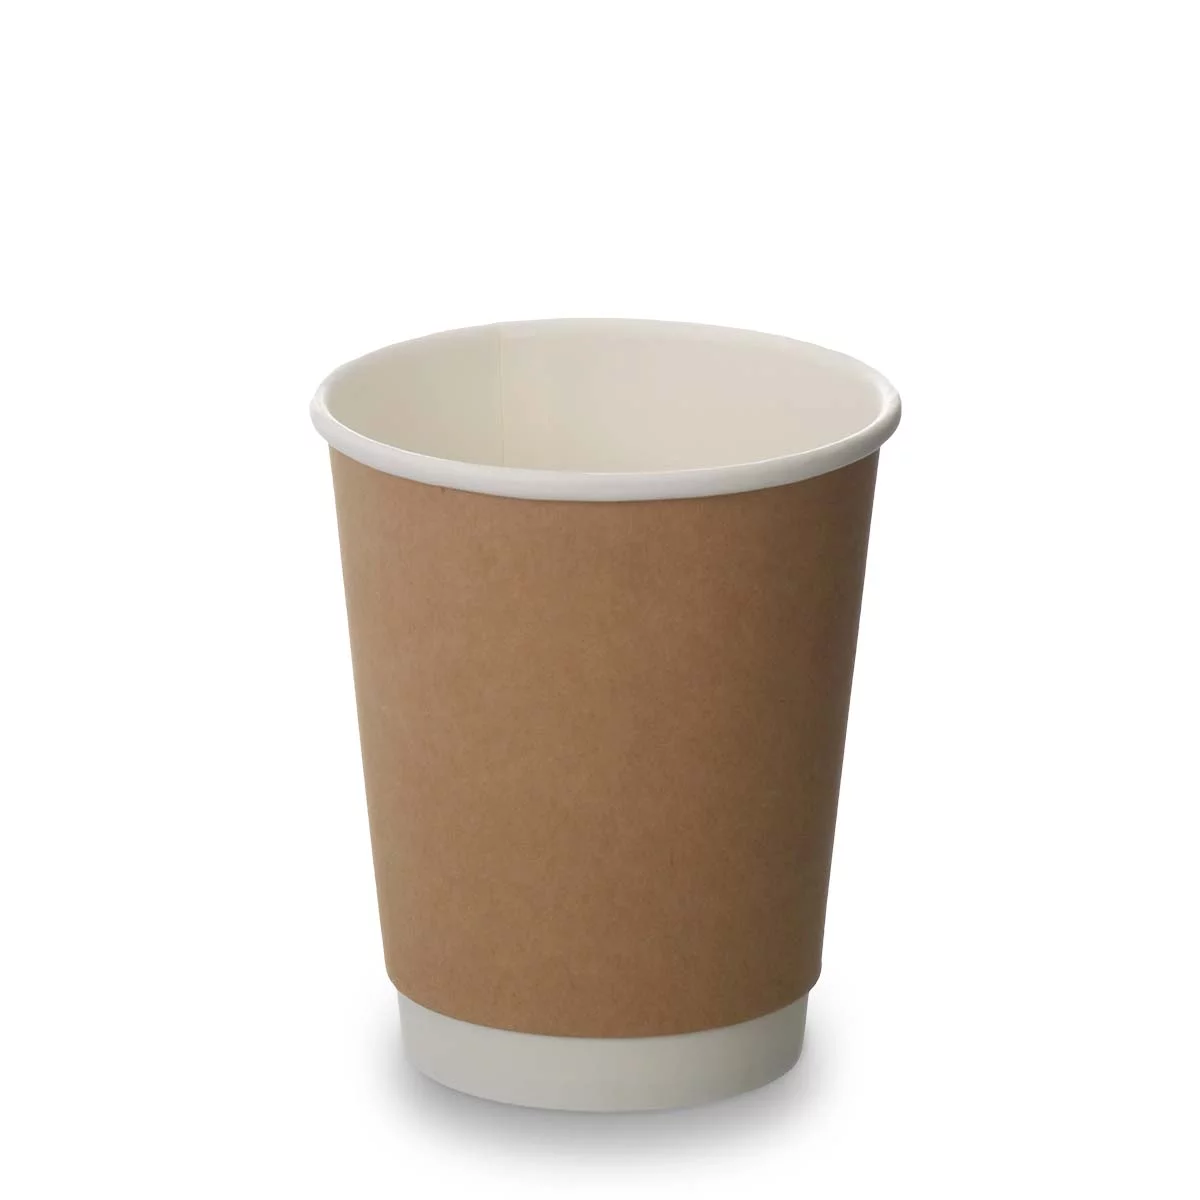 Buy Disposable Paper Coffee Cups Online | Next Day Delivery UK